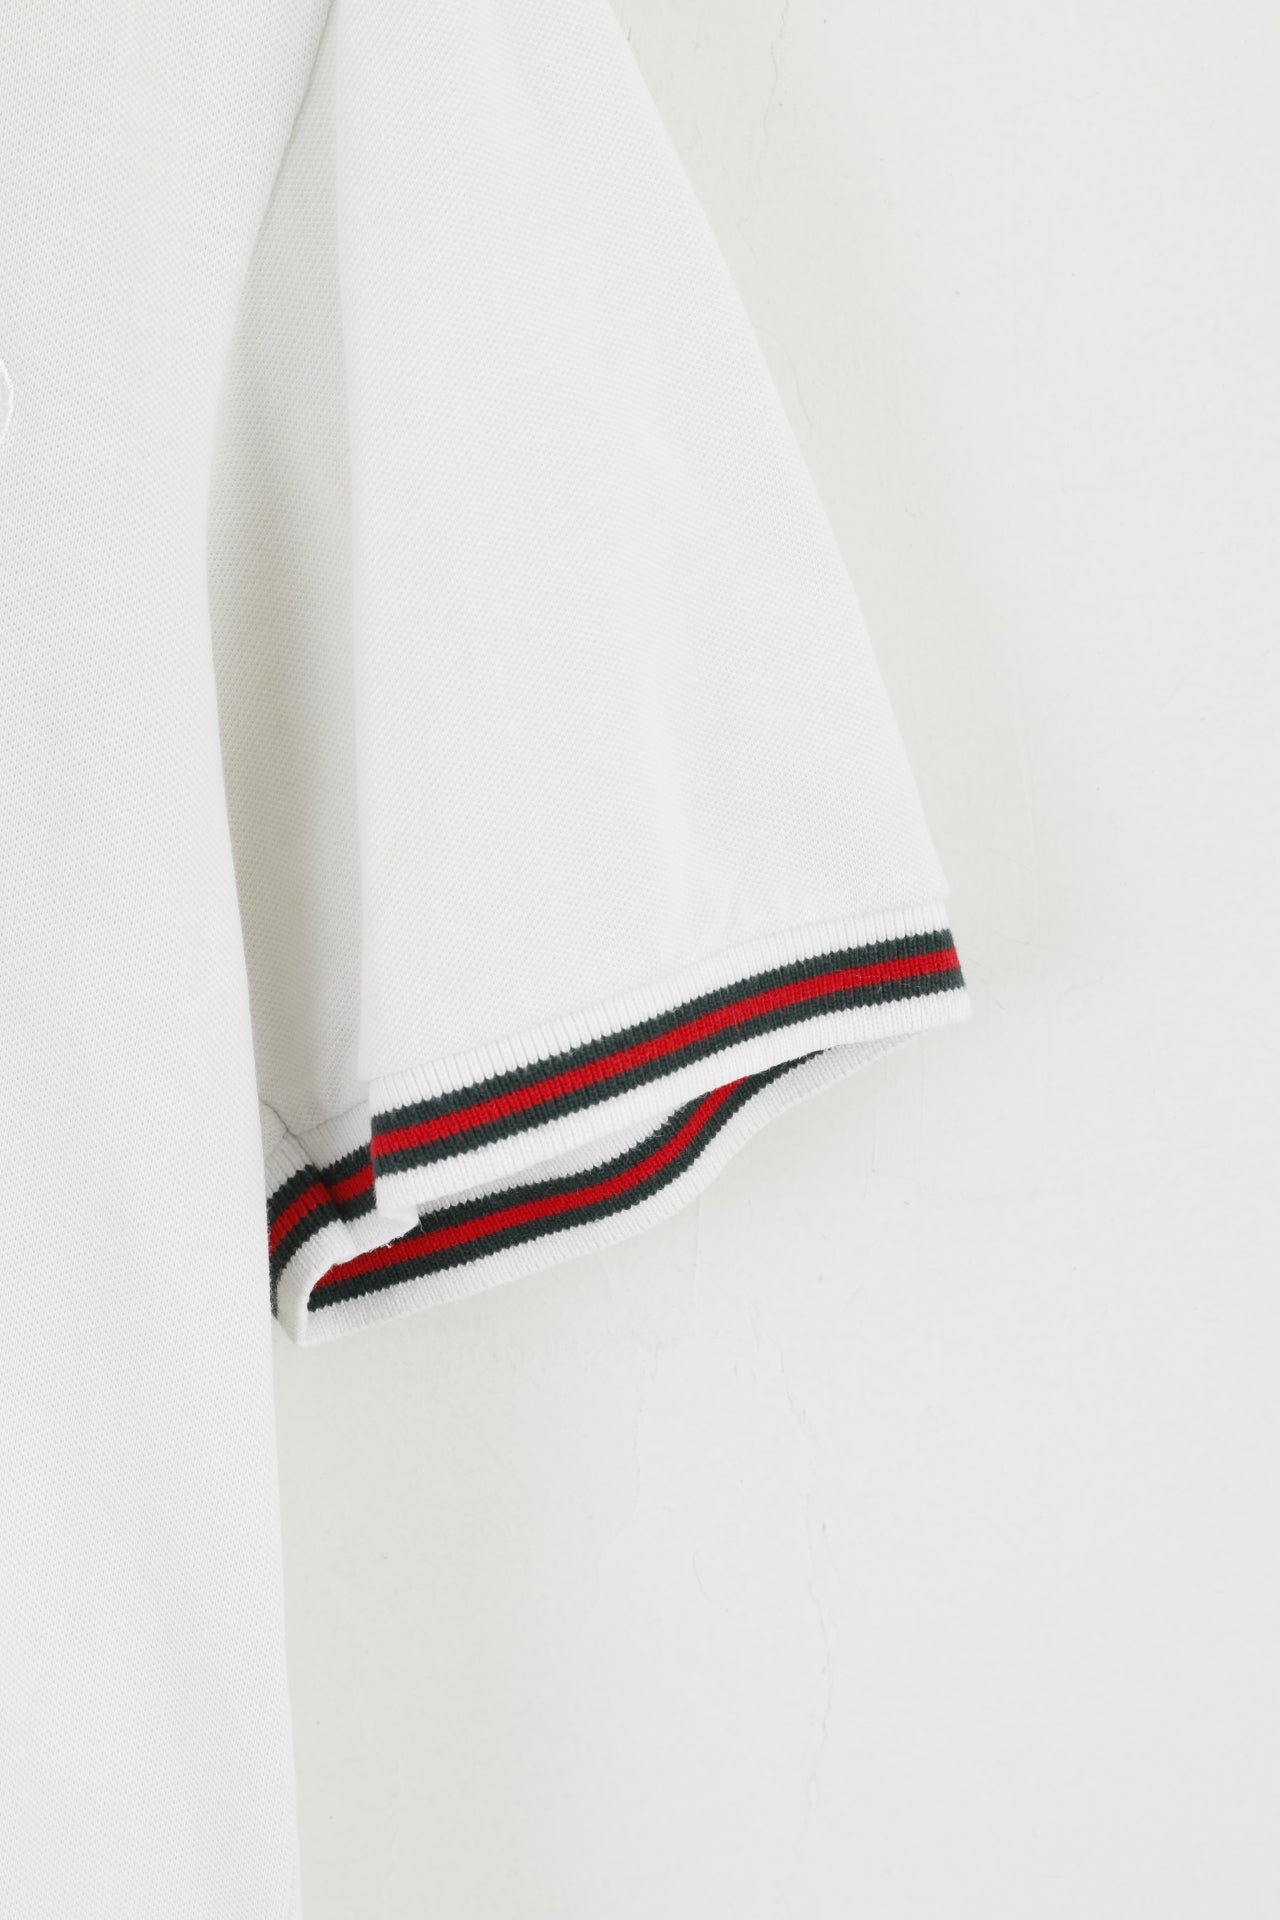 Gucci Men S Polo Shirt White Classic Detailed Buttons Stretch Fit Top